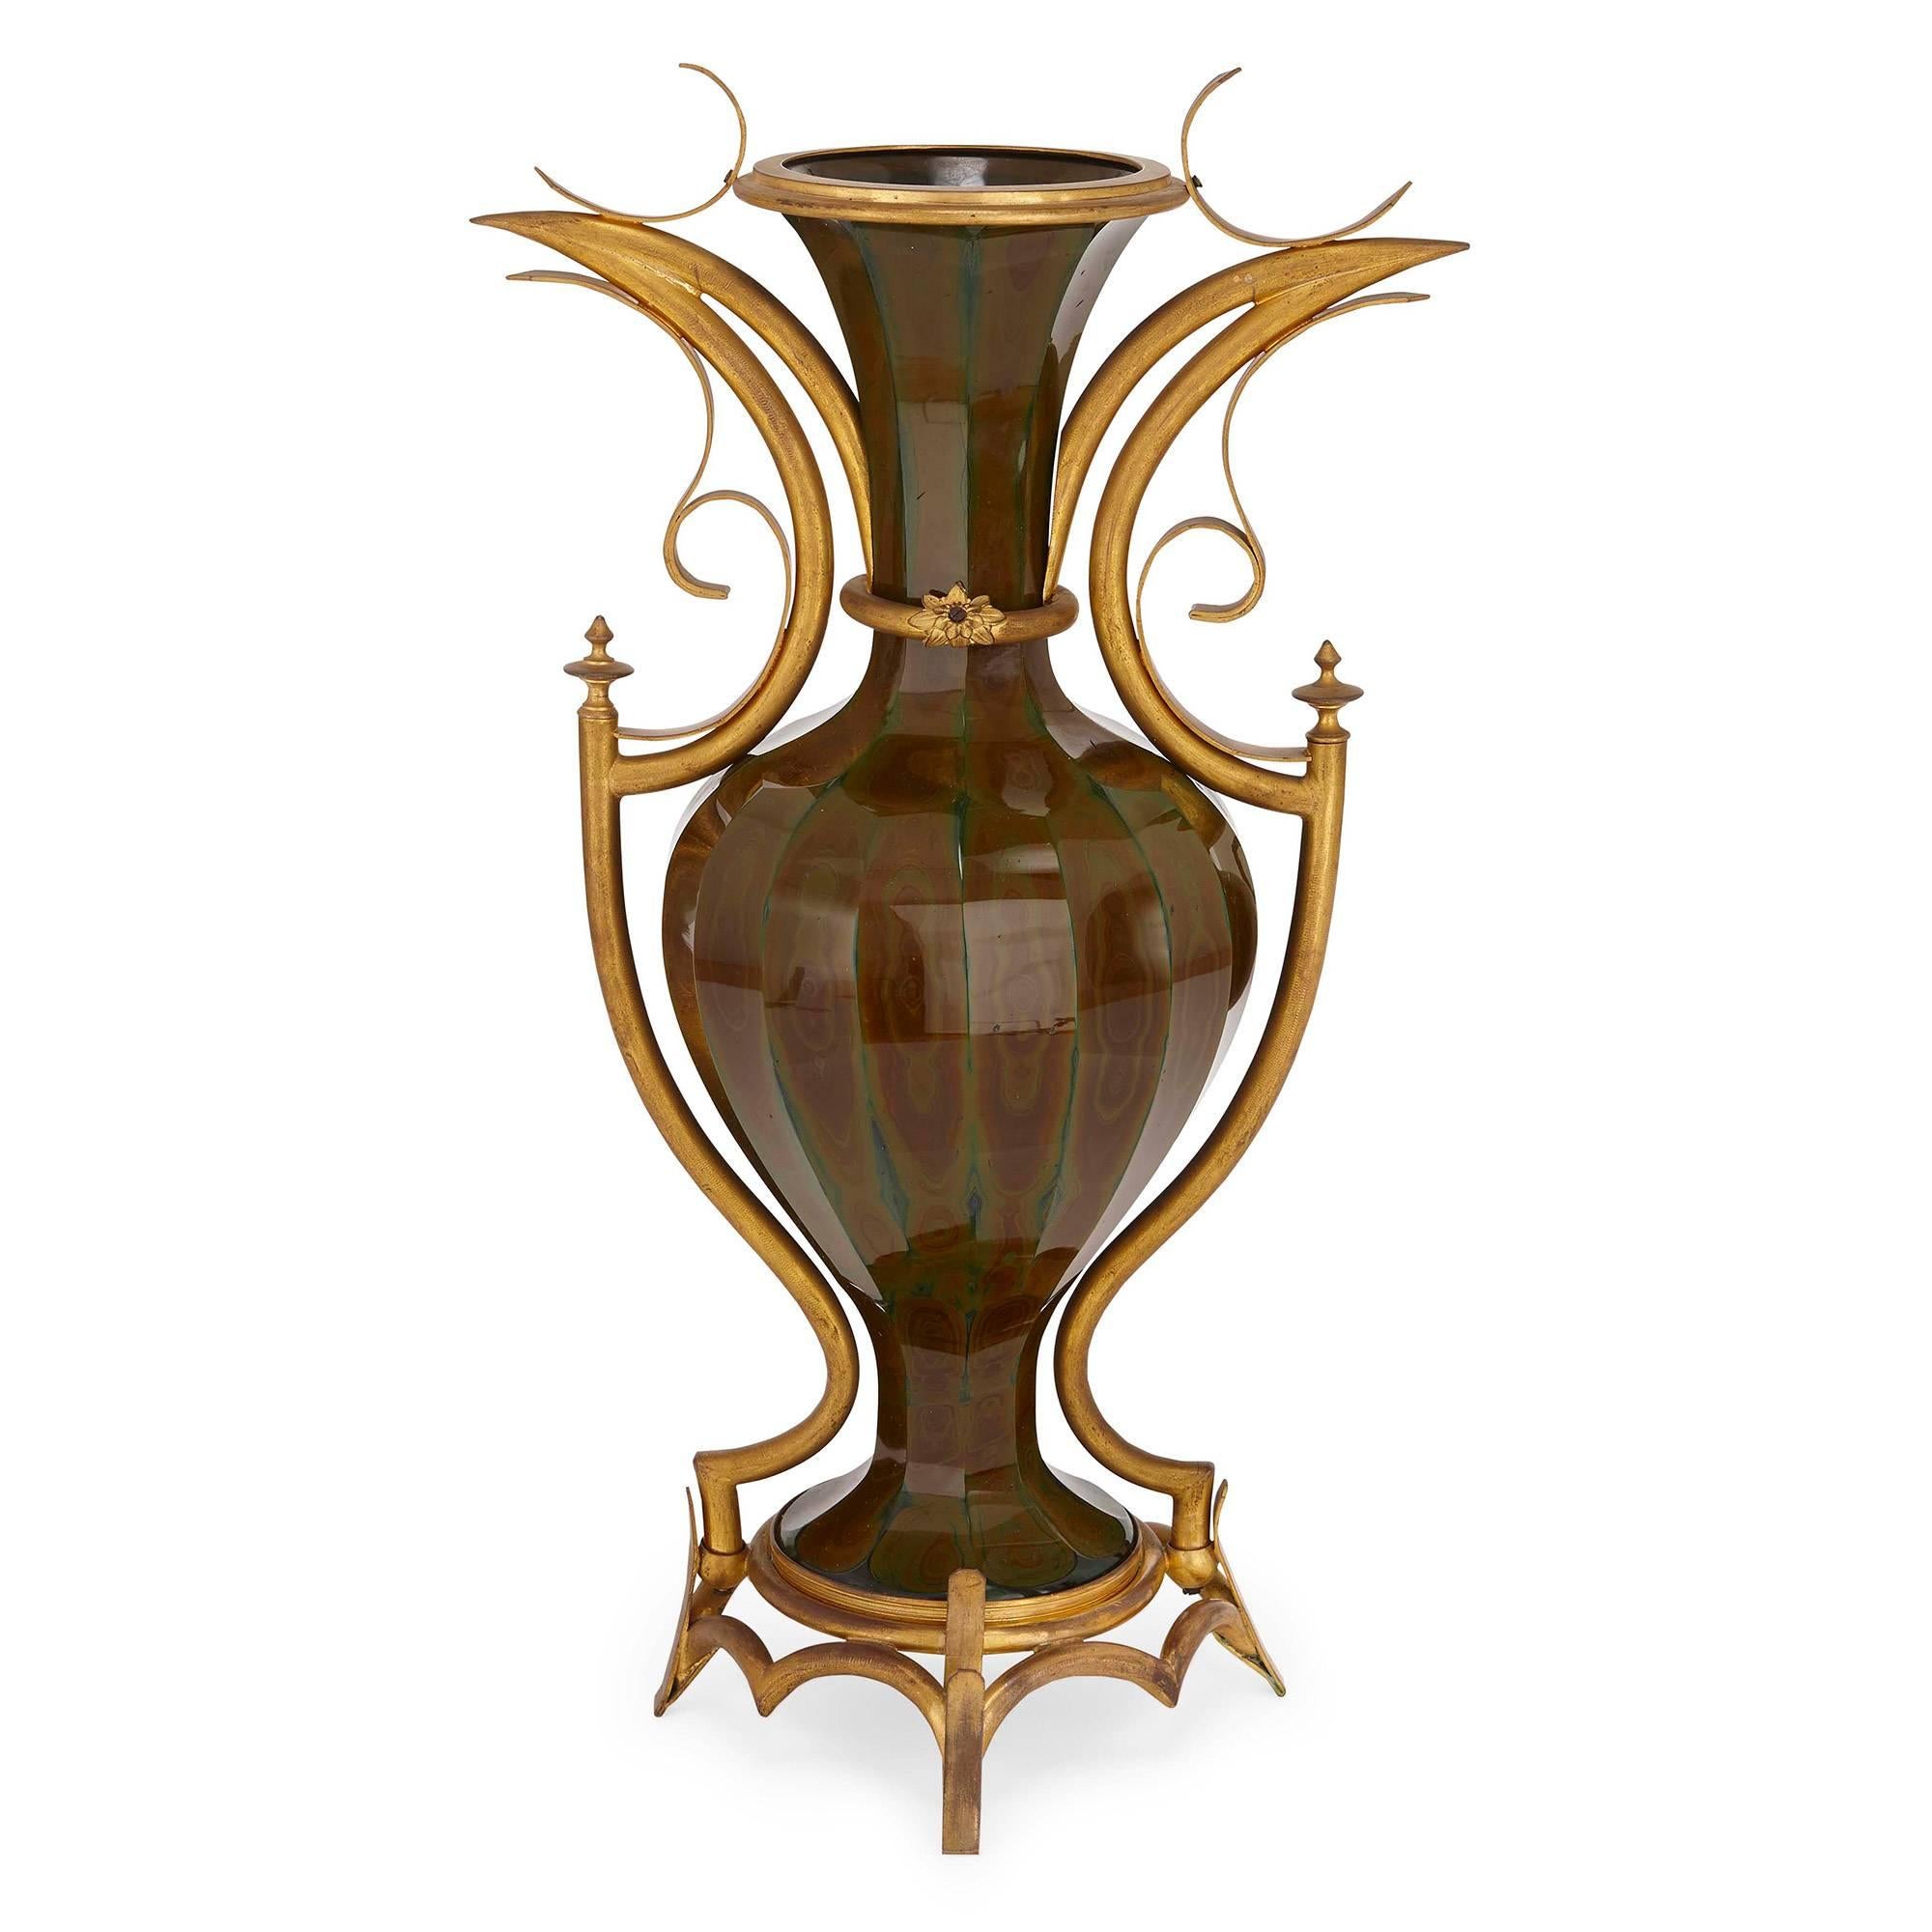 The two vases of ovoid form, the Lithyalin glass bodies canted with flared necks and bases, supported by scrolling ormolu mounts to the sides and bases

The fine pair of vases attributed to the Saint Louis Glassworks (French, f. 1767)

Lithyalin